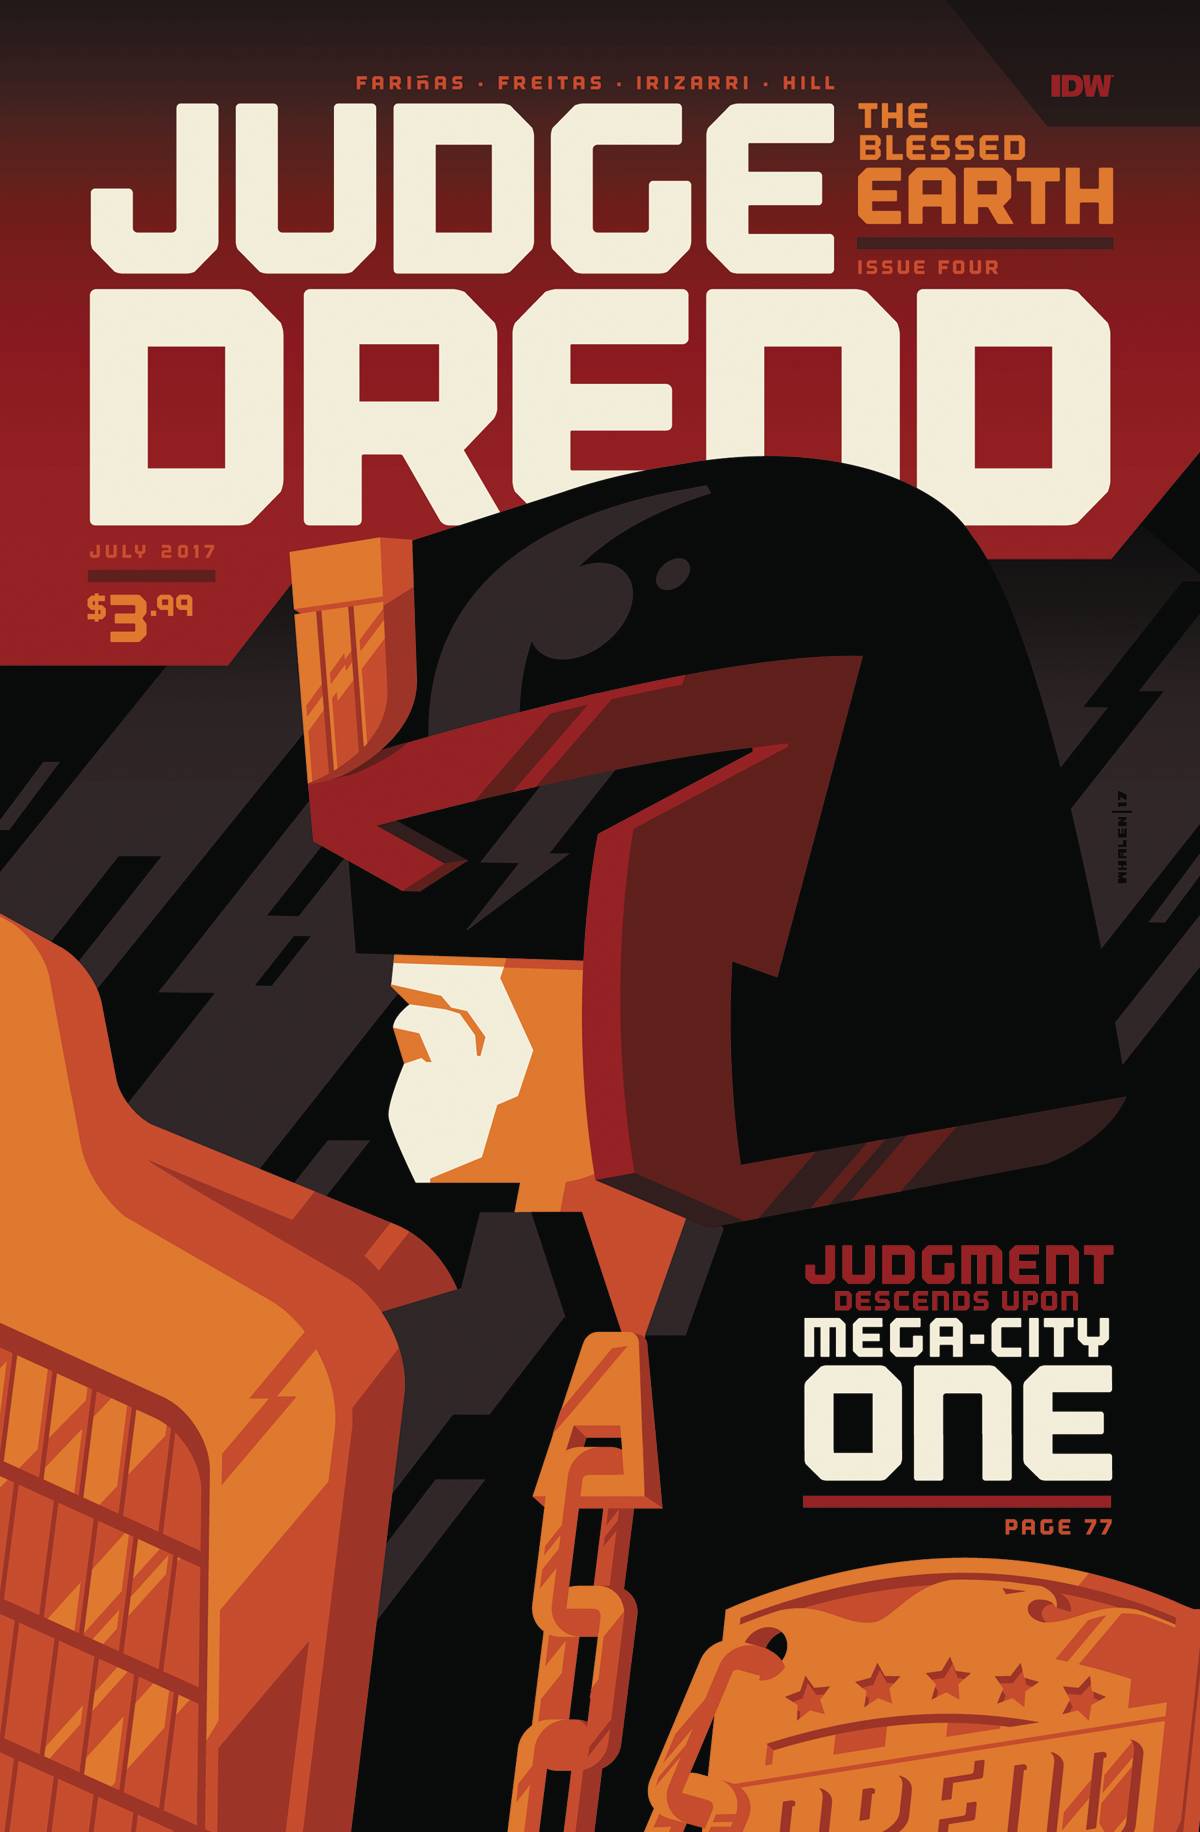 JUDGE DREDD: THE BLESSED EARTH#4